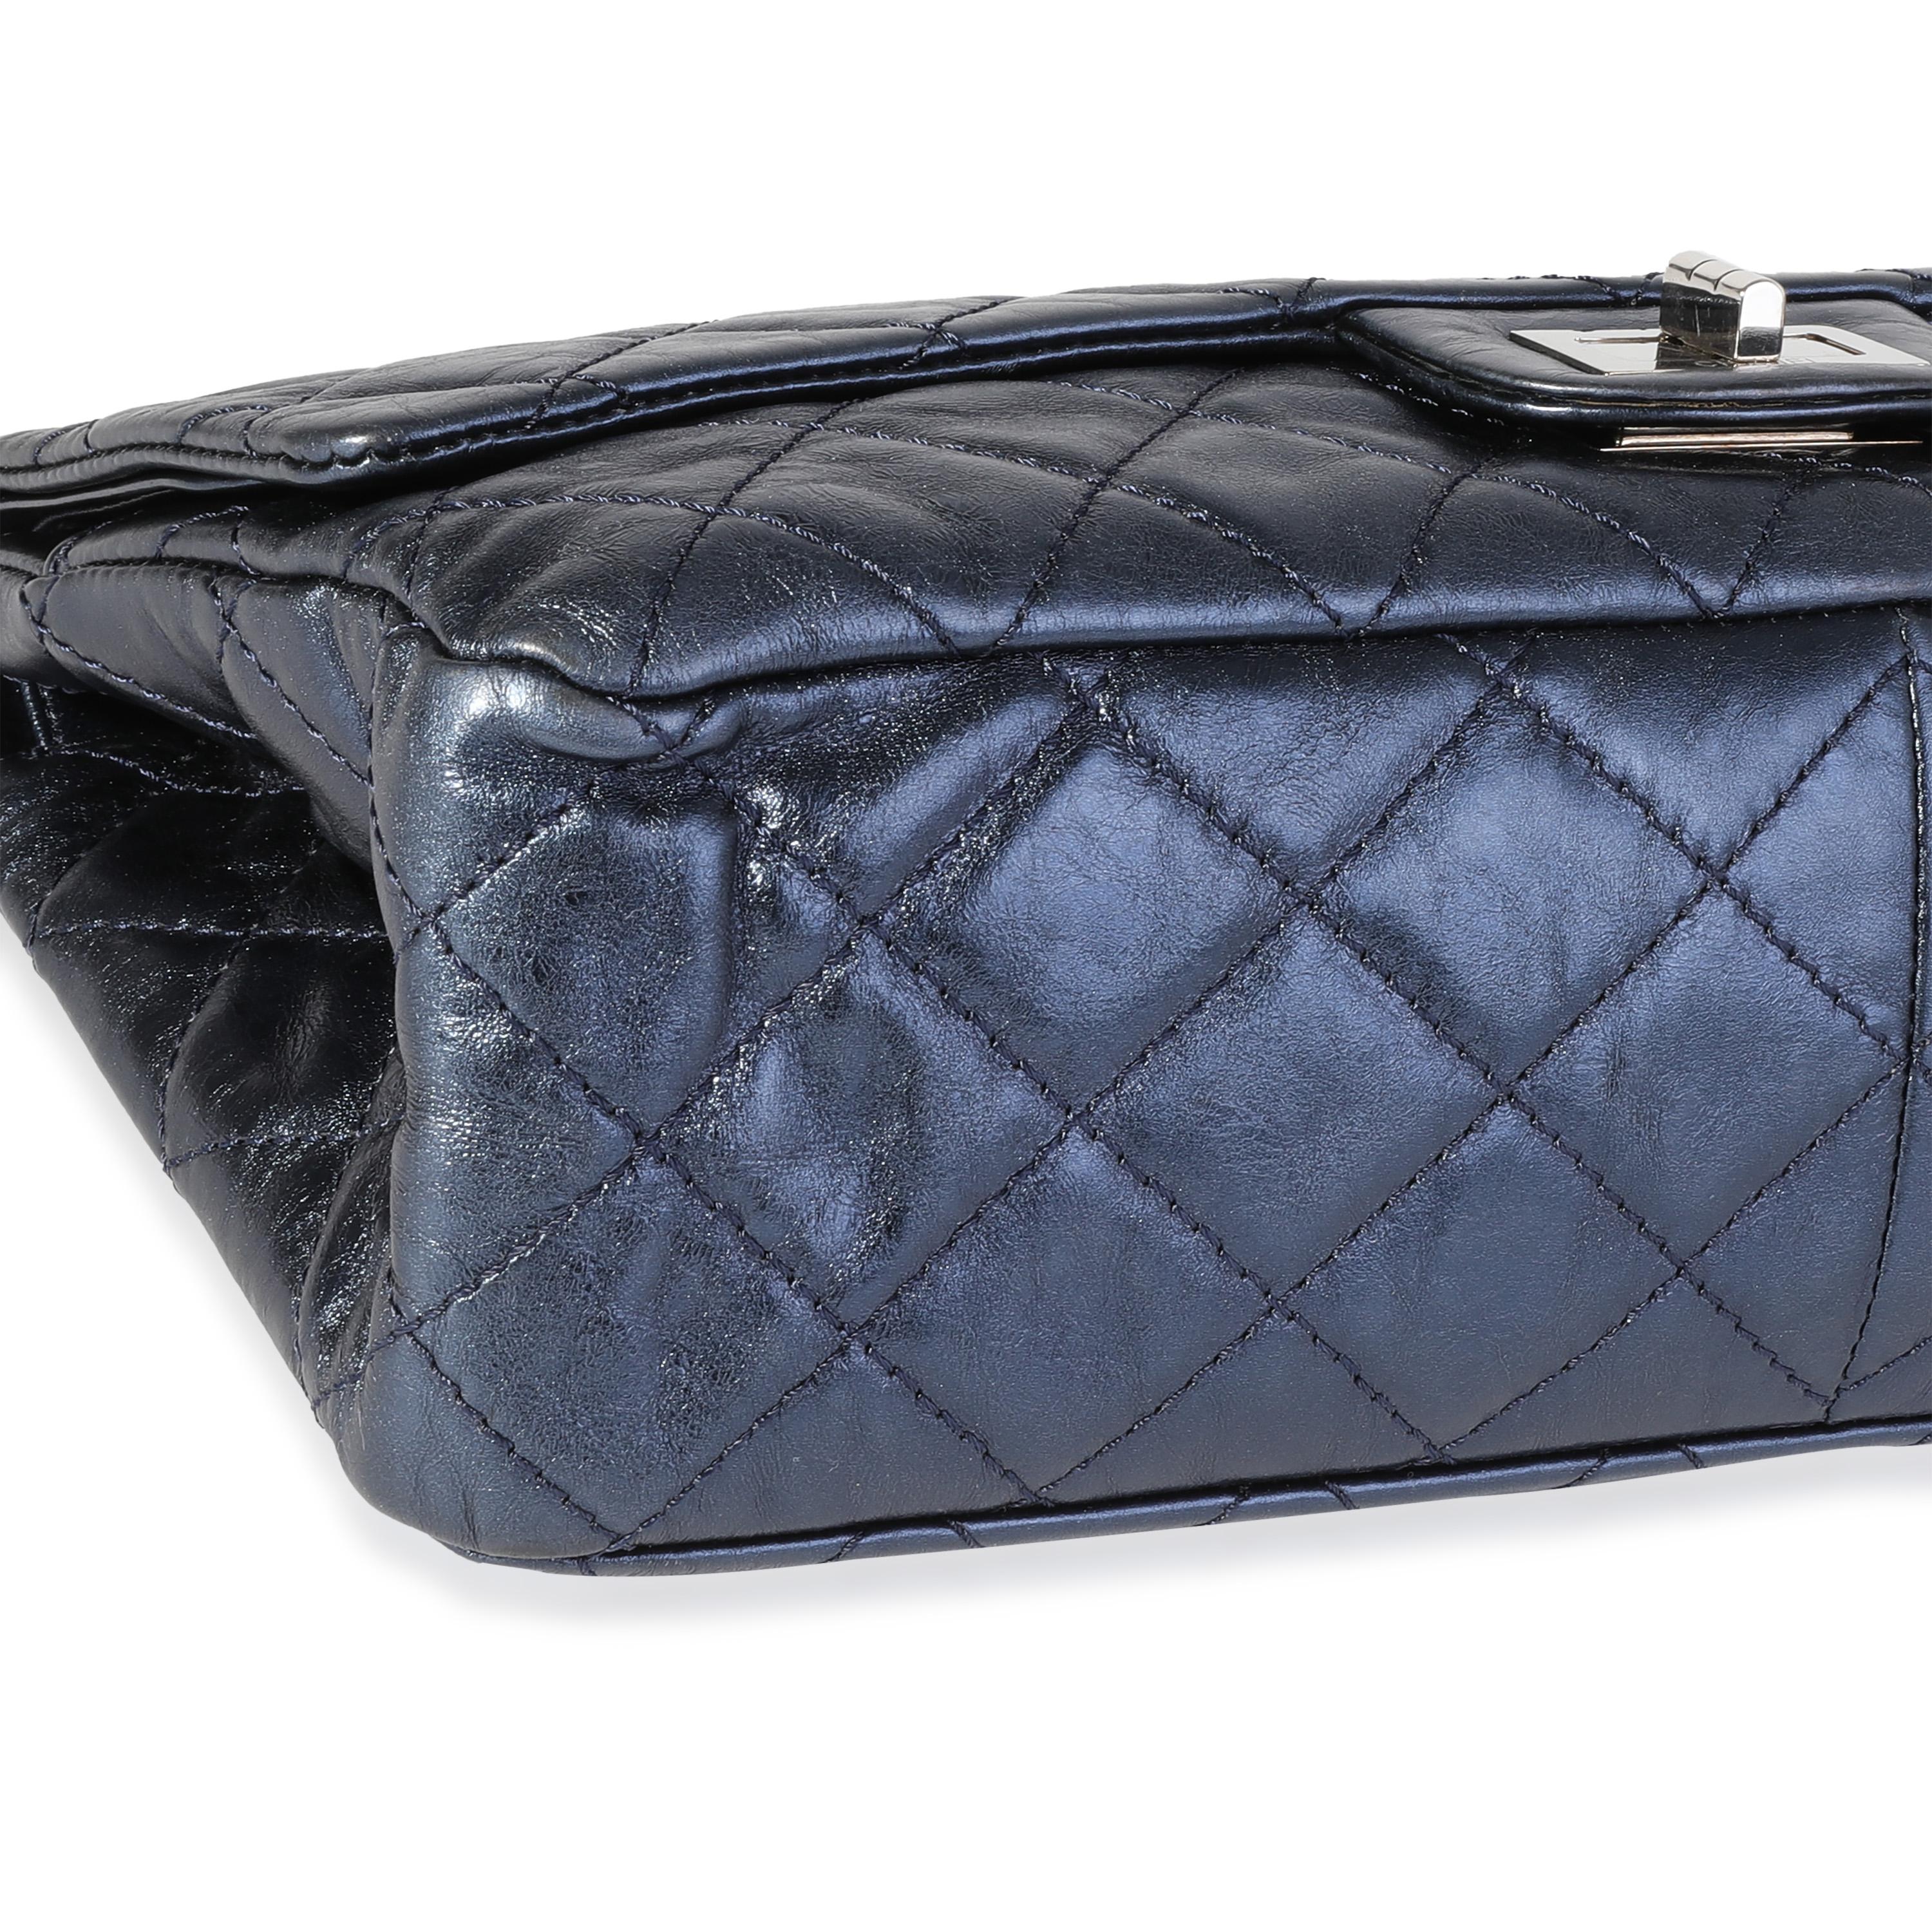 Listing Title: Chanel Metallic Blue Quilted Aged Calfskin Reissue 2.55 227 Double Flap Bag
SKU: 116034
Condition: Pre-owned (3000)
Handbag Condition: Very Good
Condition Comments: Very Good Condition. Scuffing to corners and throughout exterior